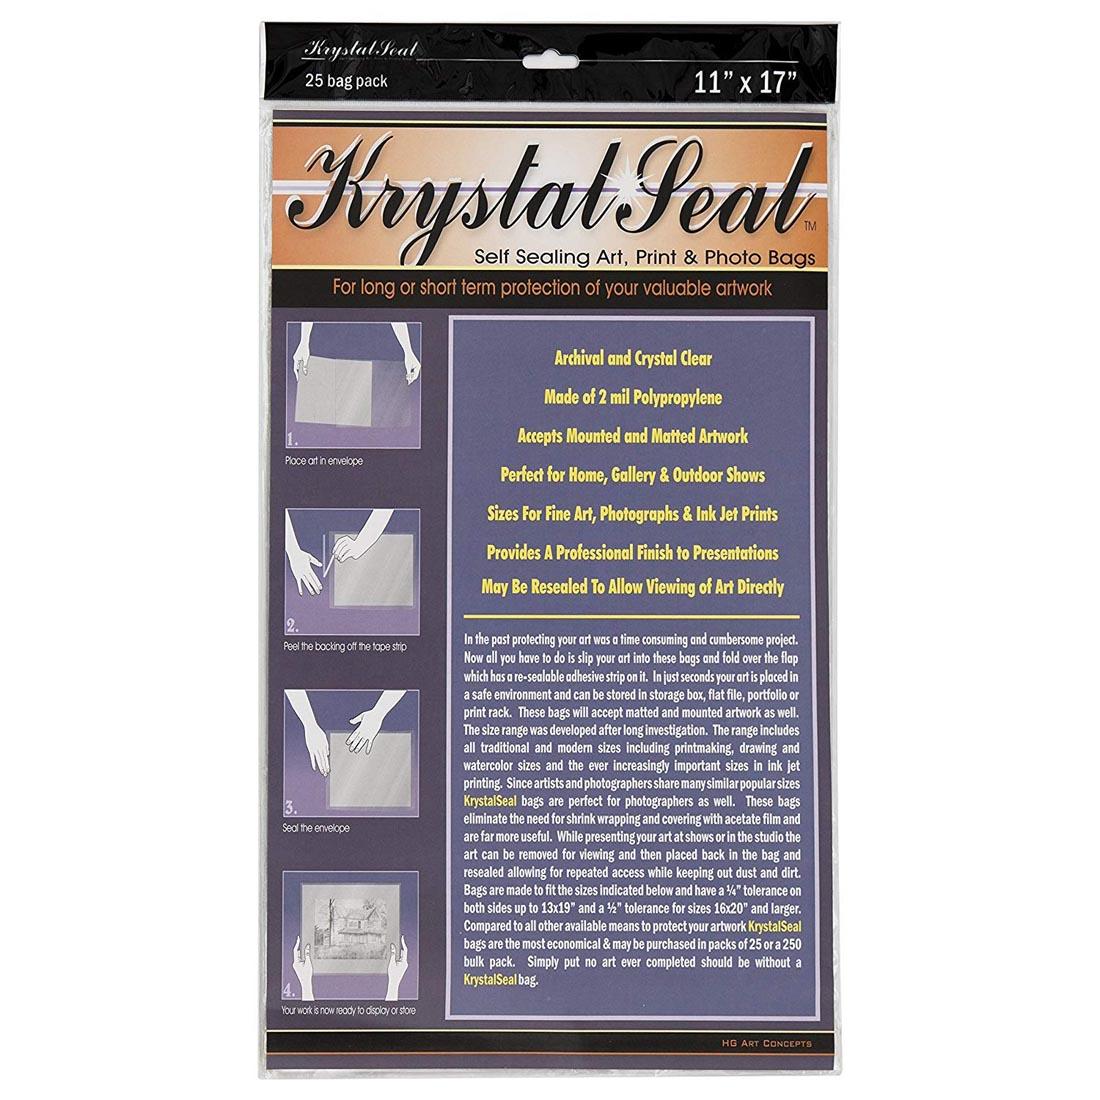 11x17" clear polypropylene bags for sealing documents